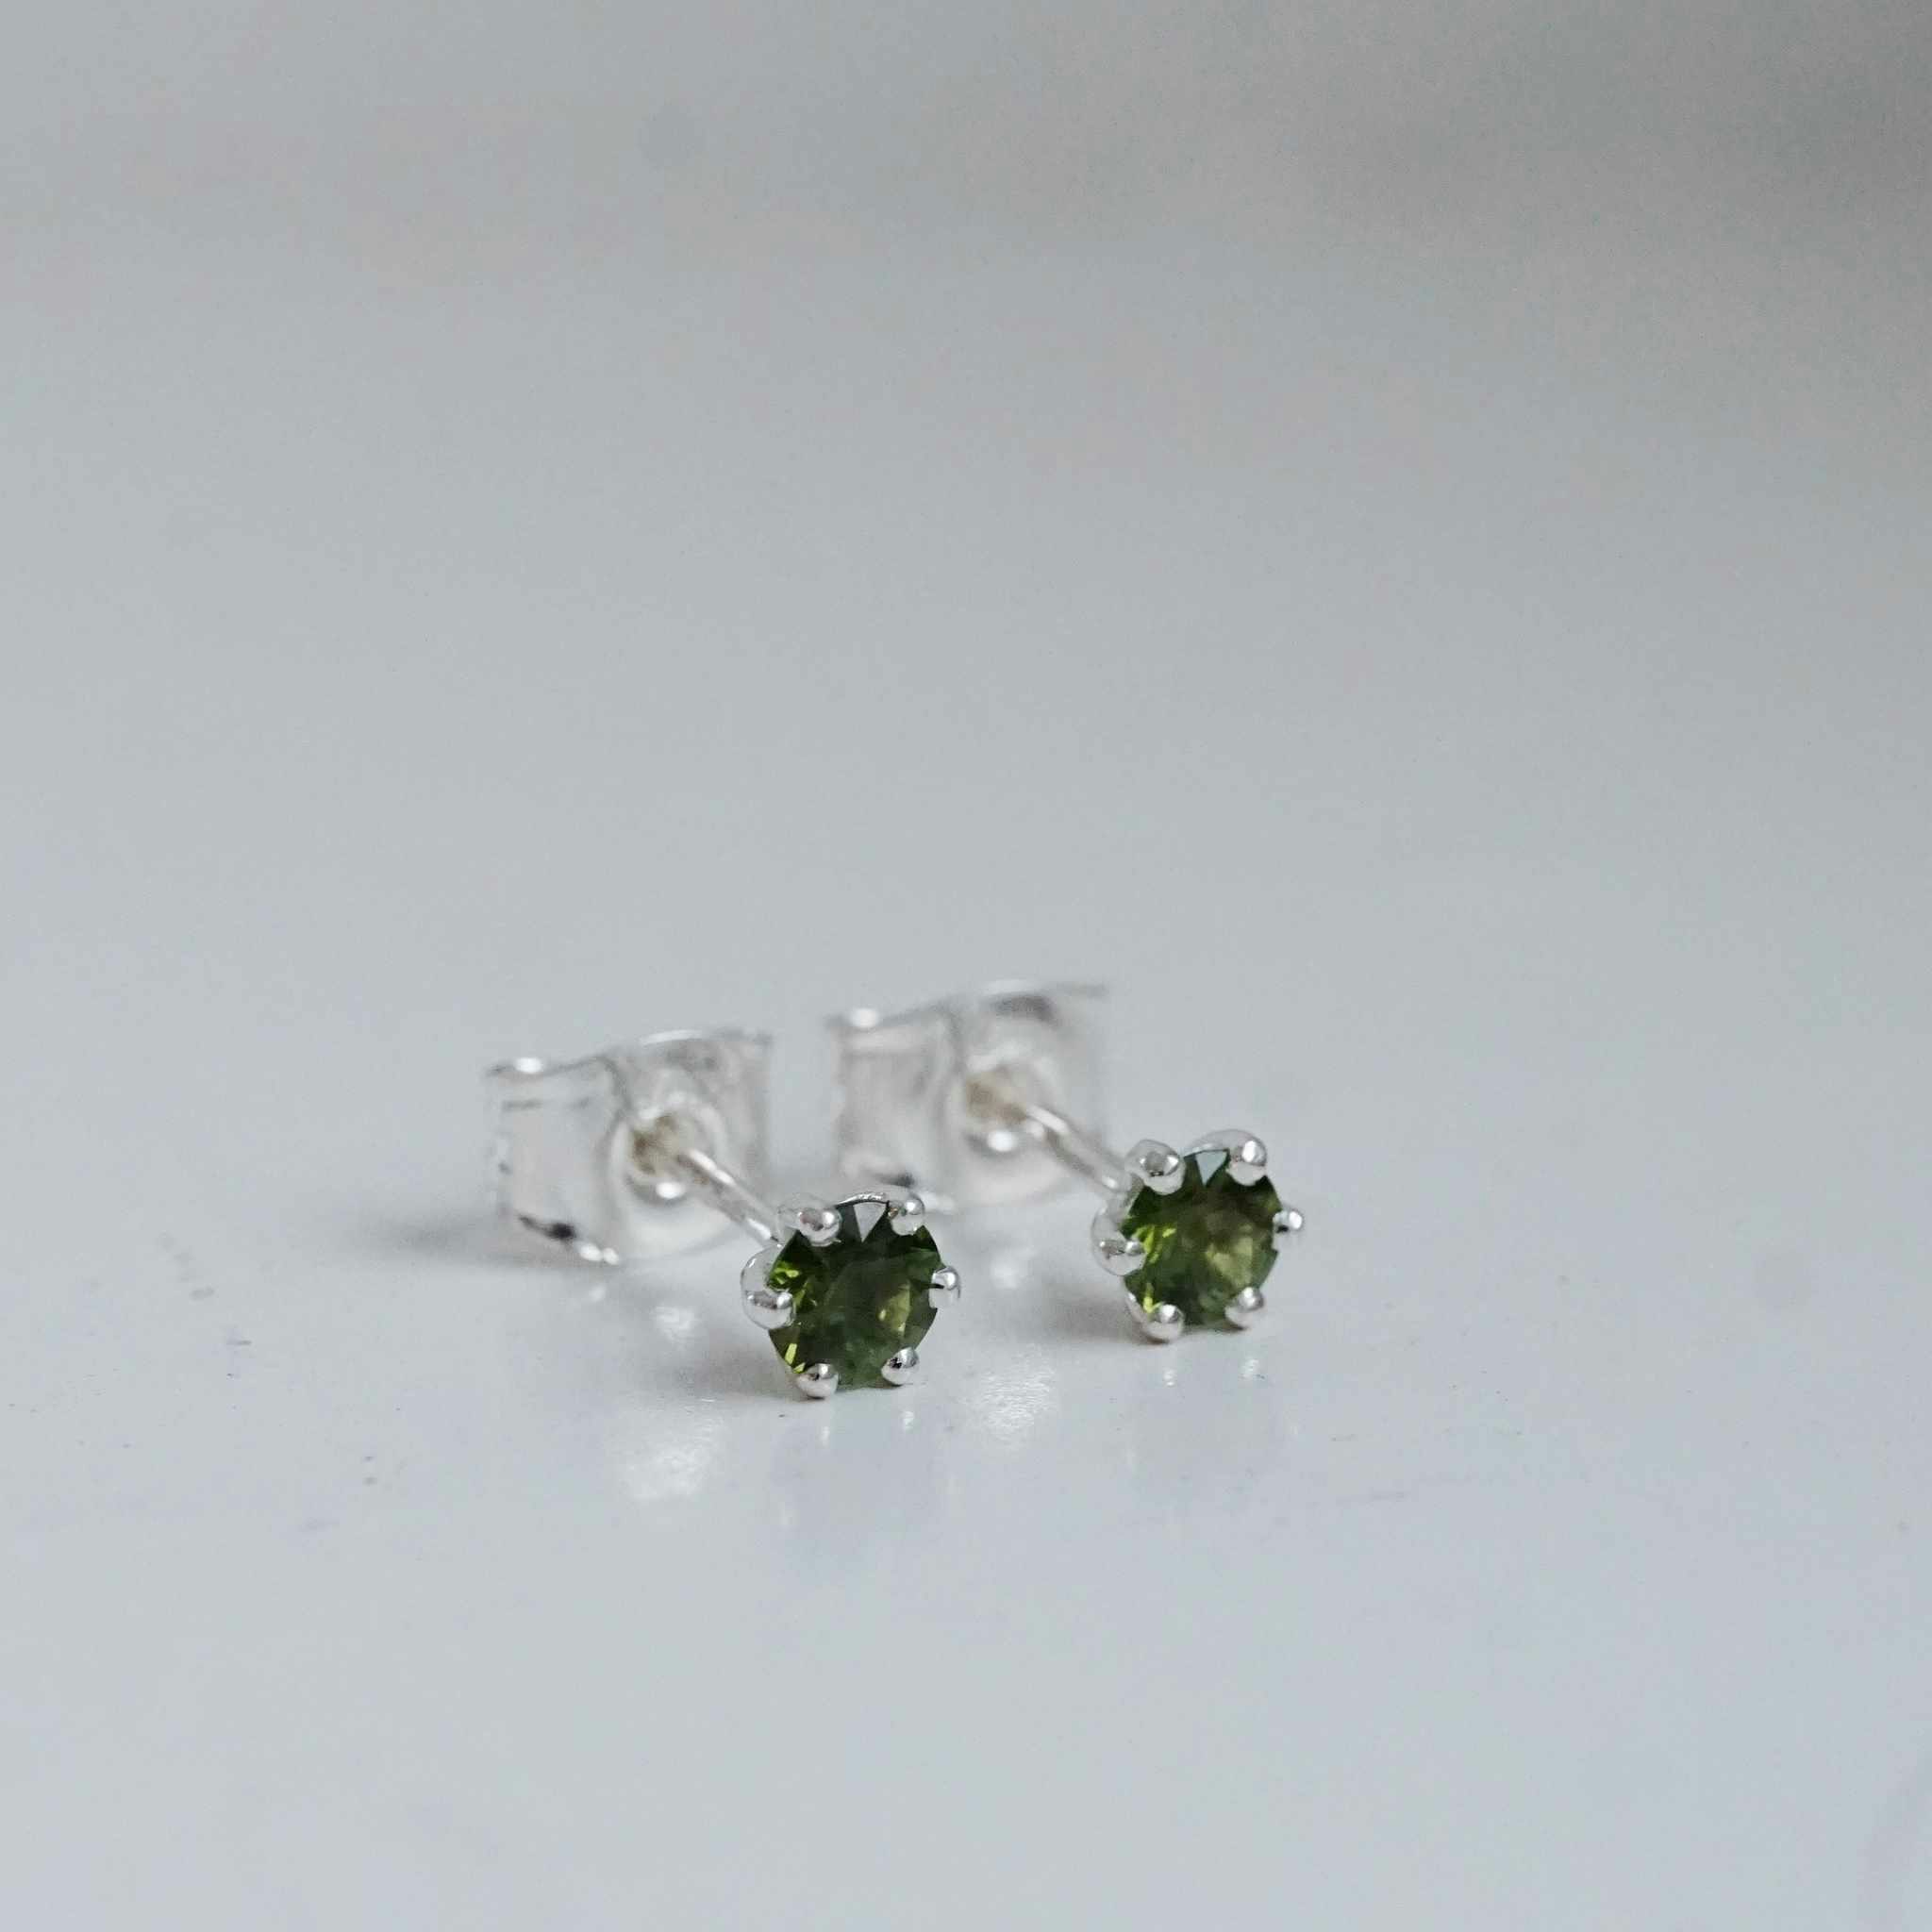 "Cordelia" earstuds in silver with green tourmaline